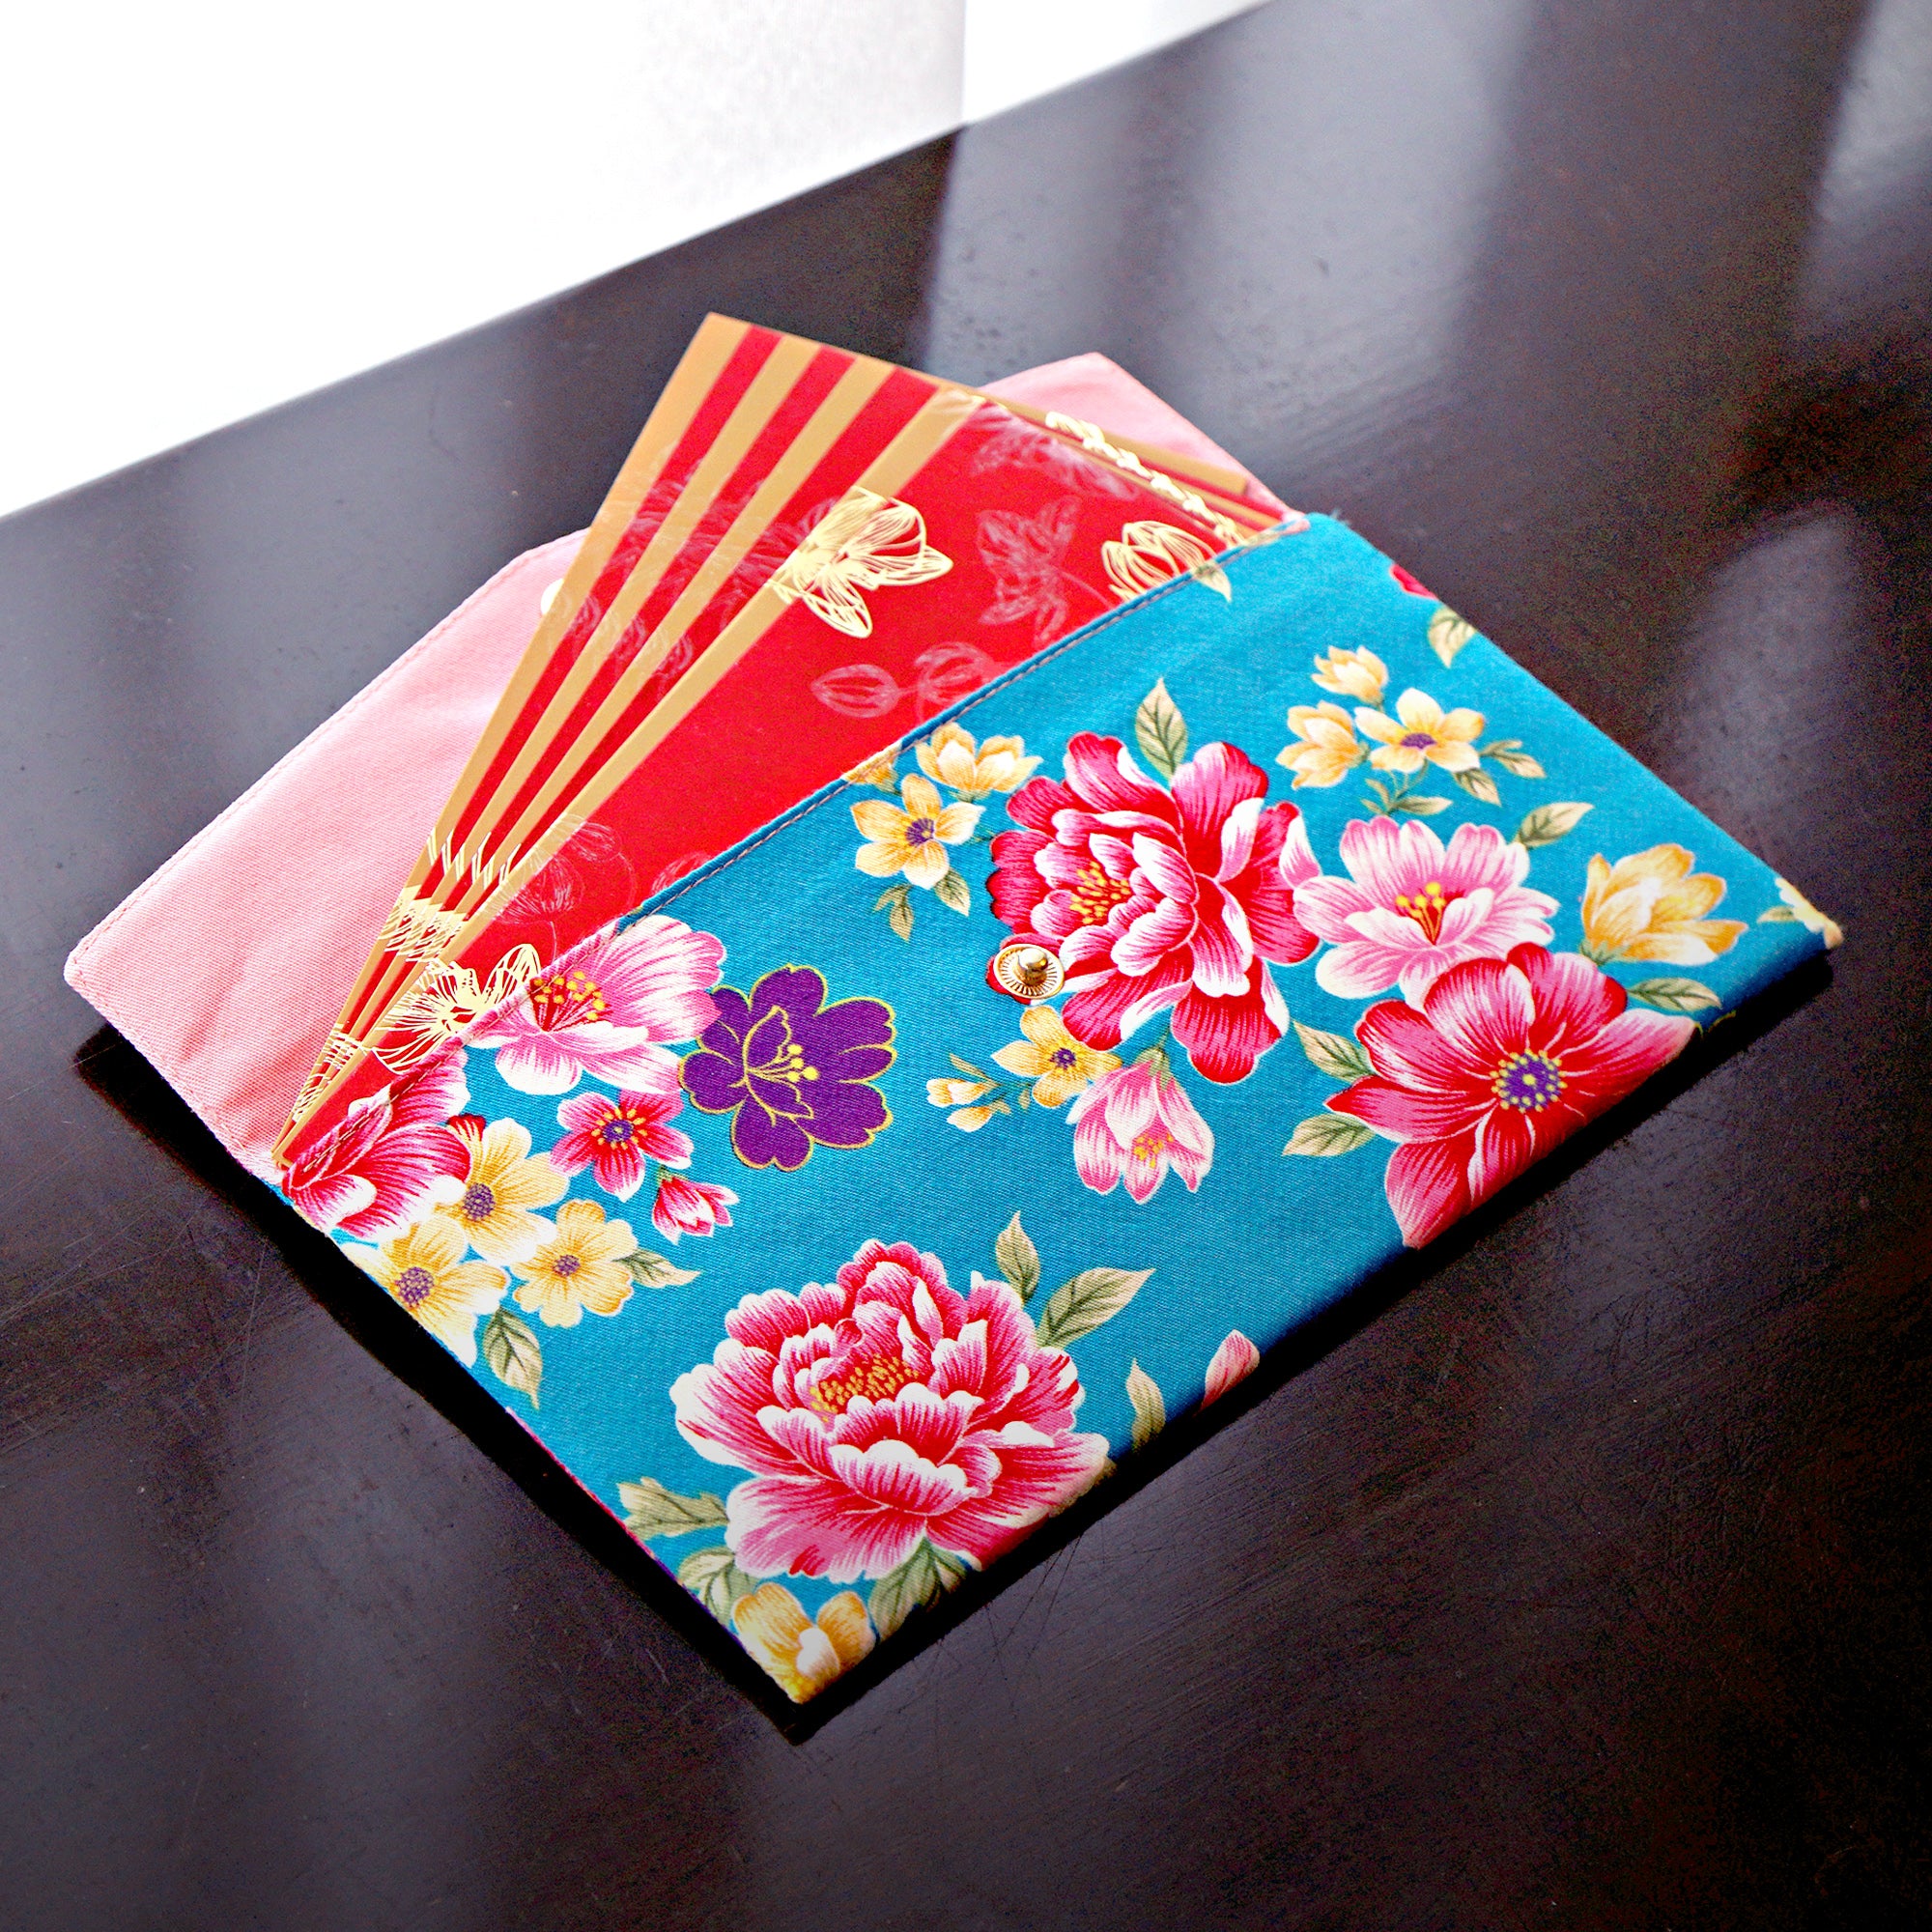 Red Packet Organizer - Rich and Honored